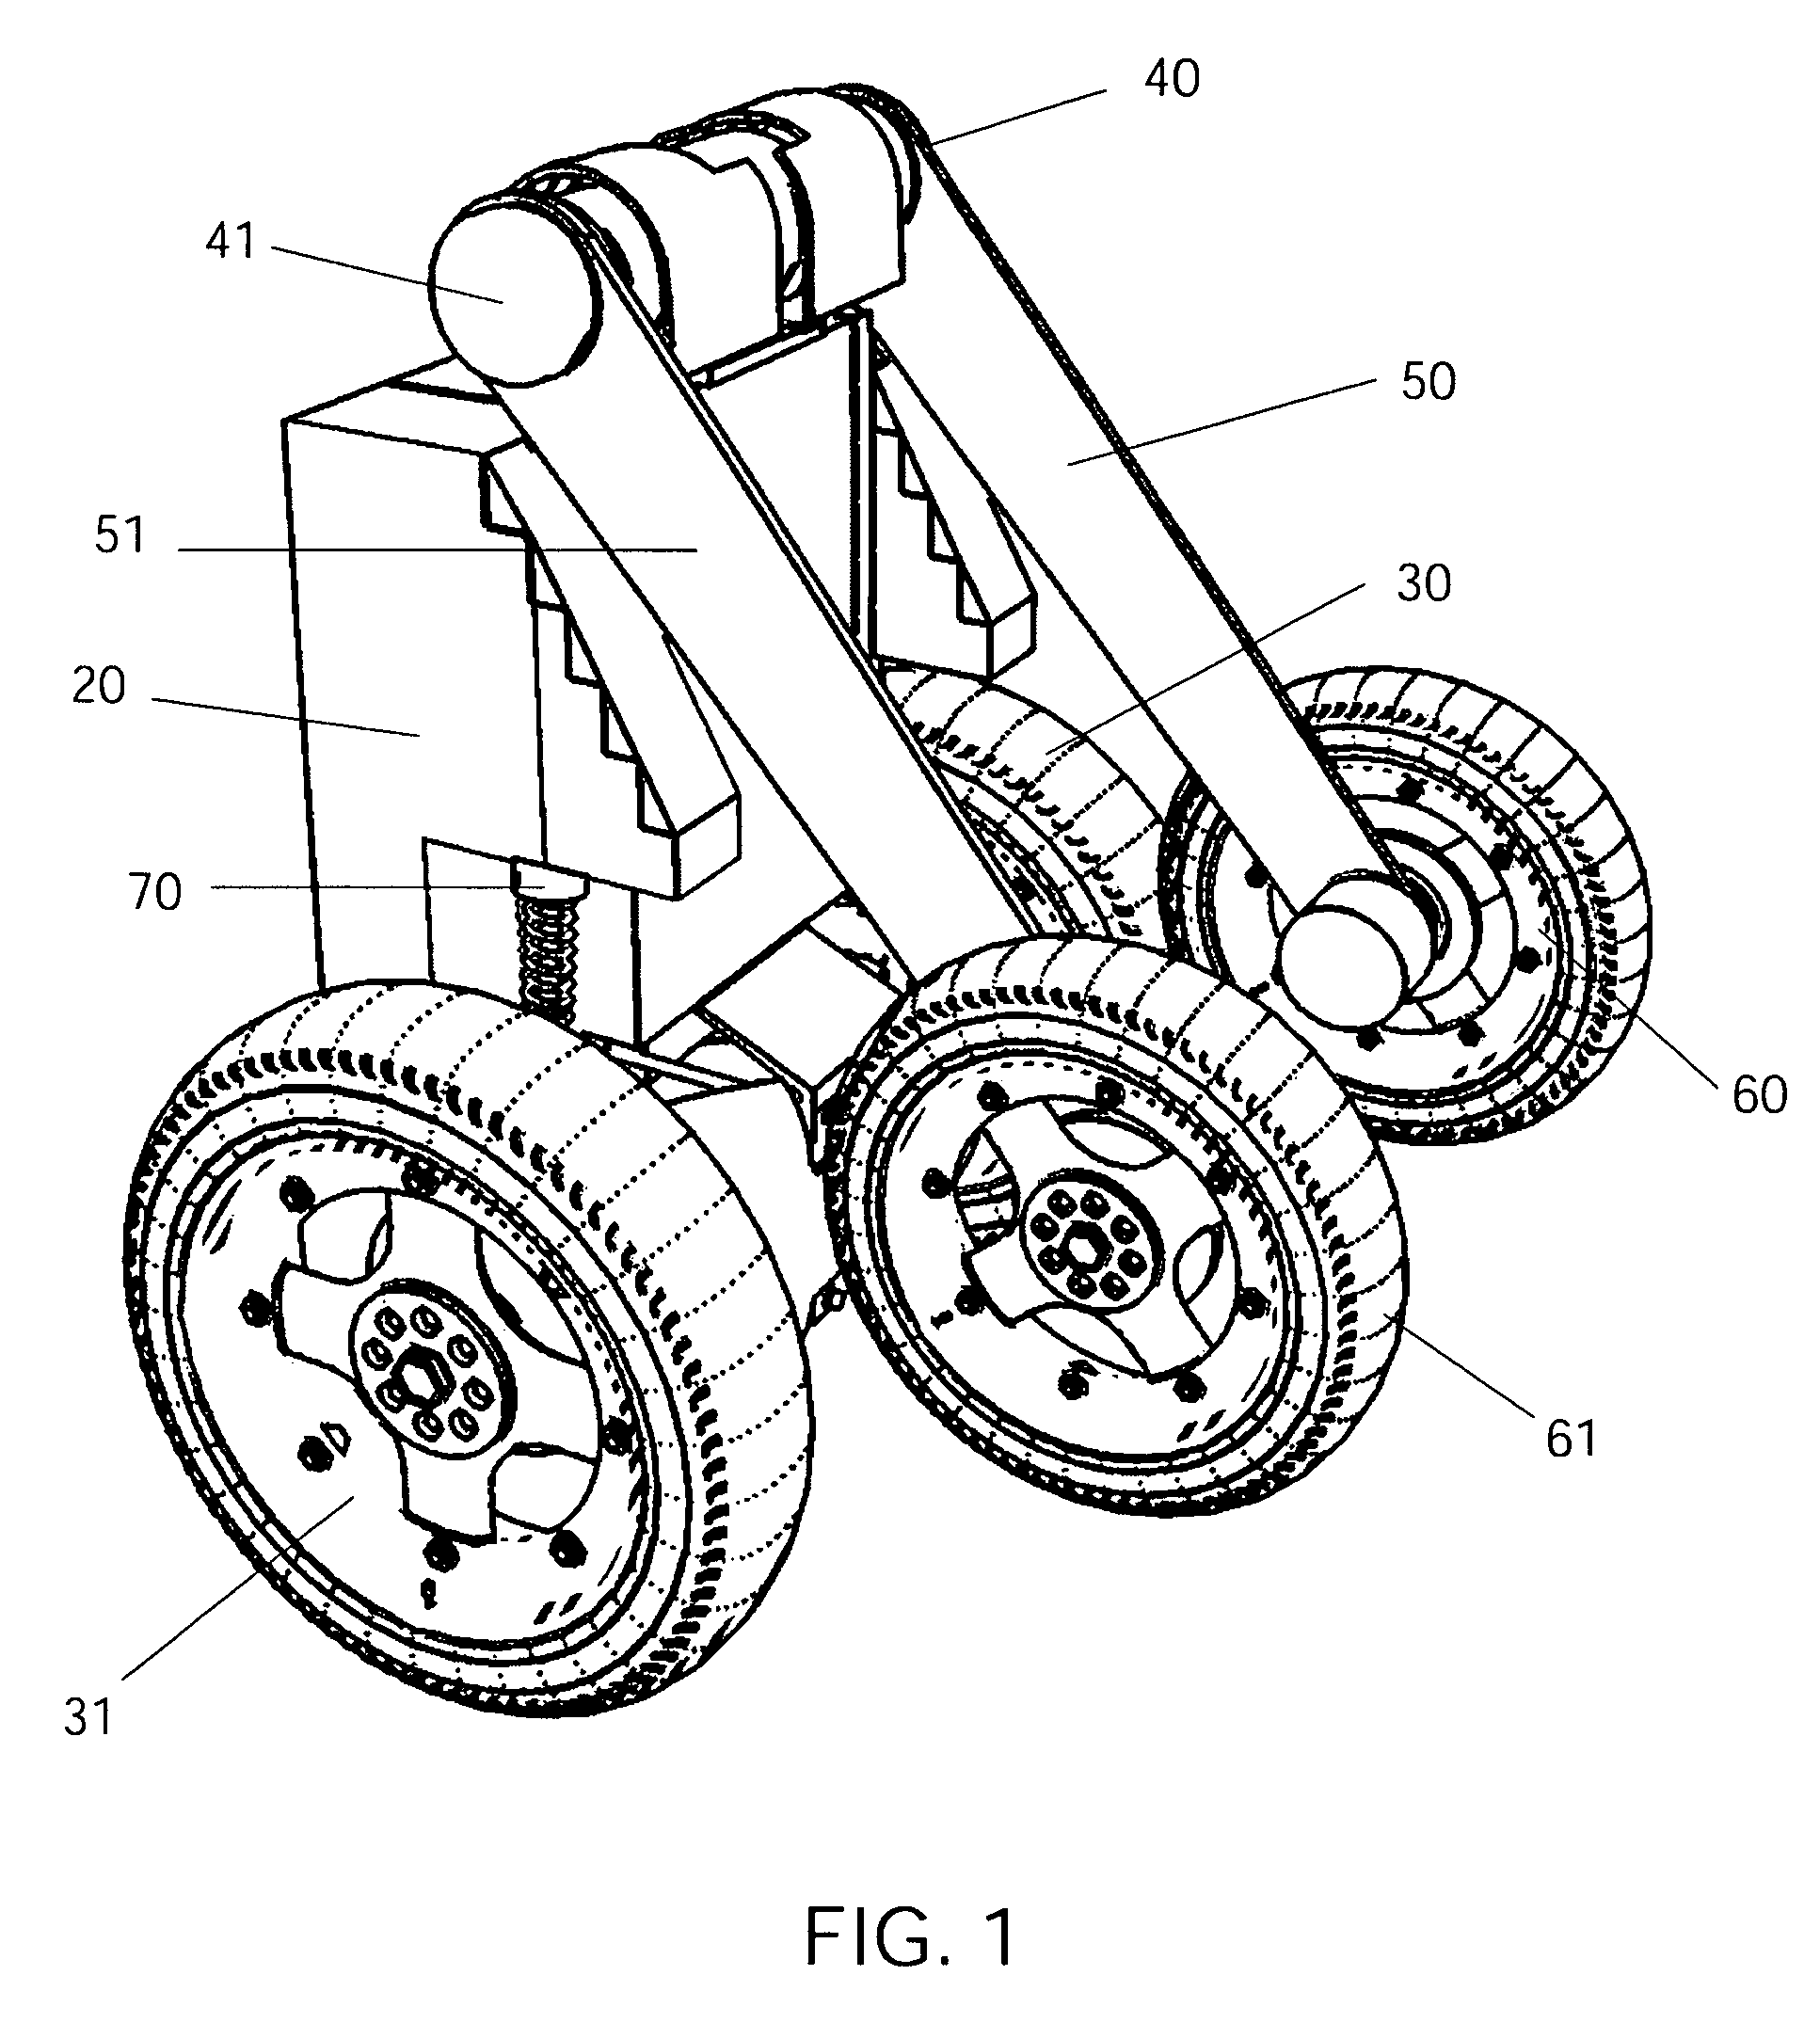 Reconfigurable balancing robot and method for dynamically transitioning between statically stable mode and dynamically balanced mode